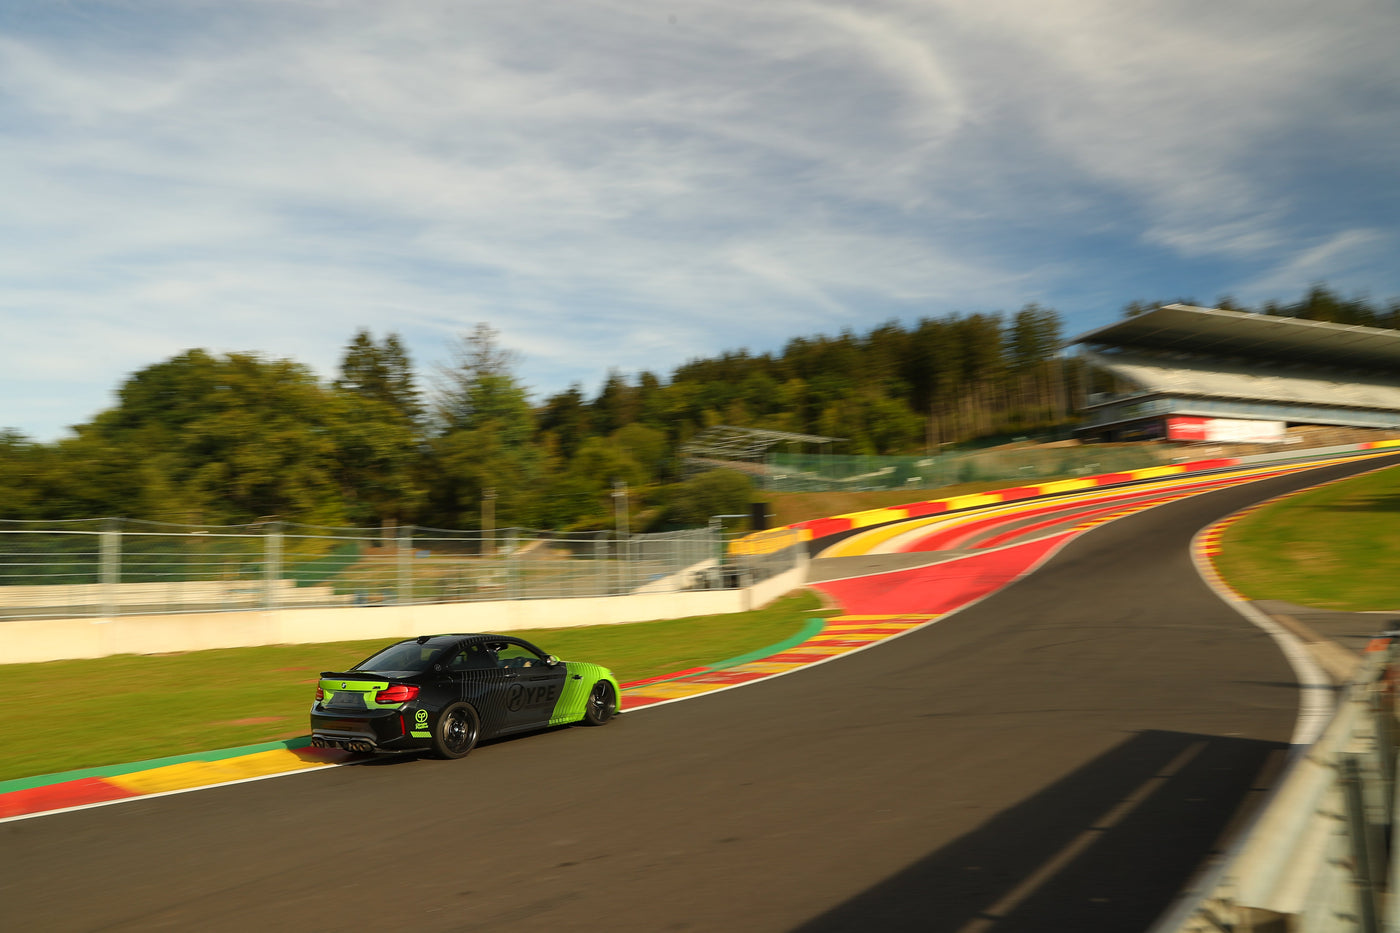 Spa Francorchamps | 8th August